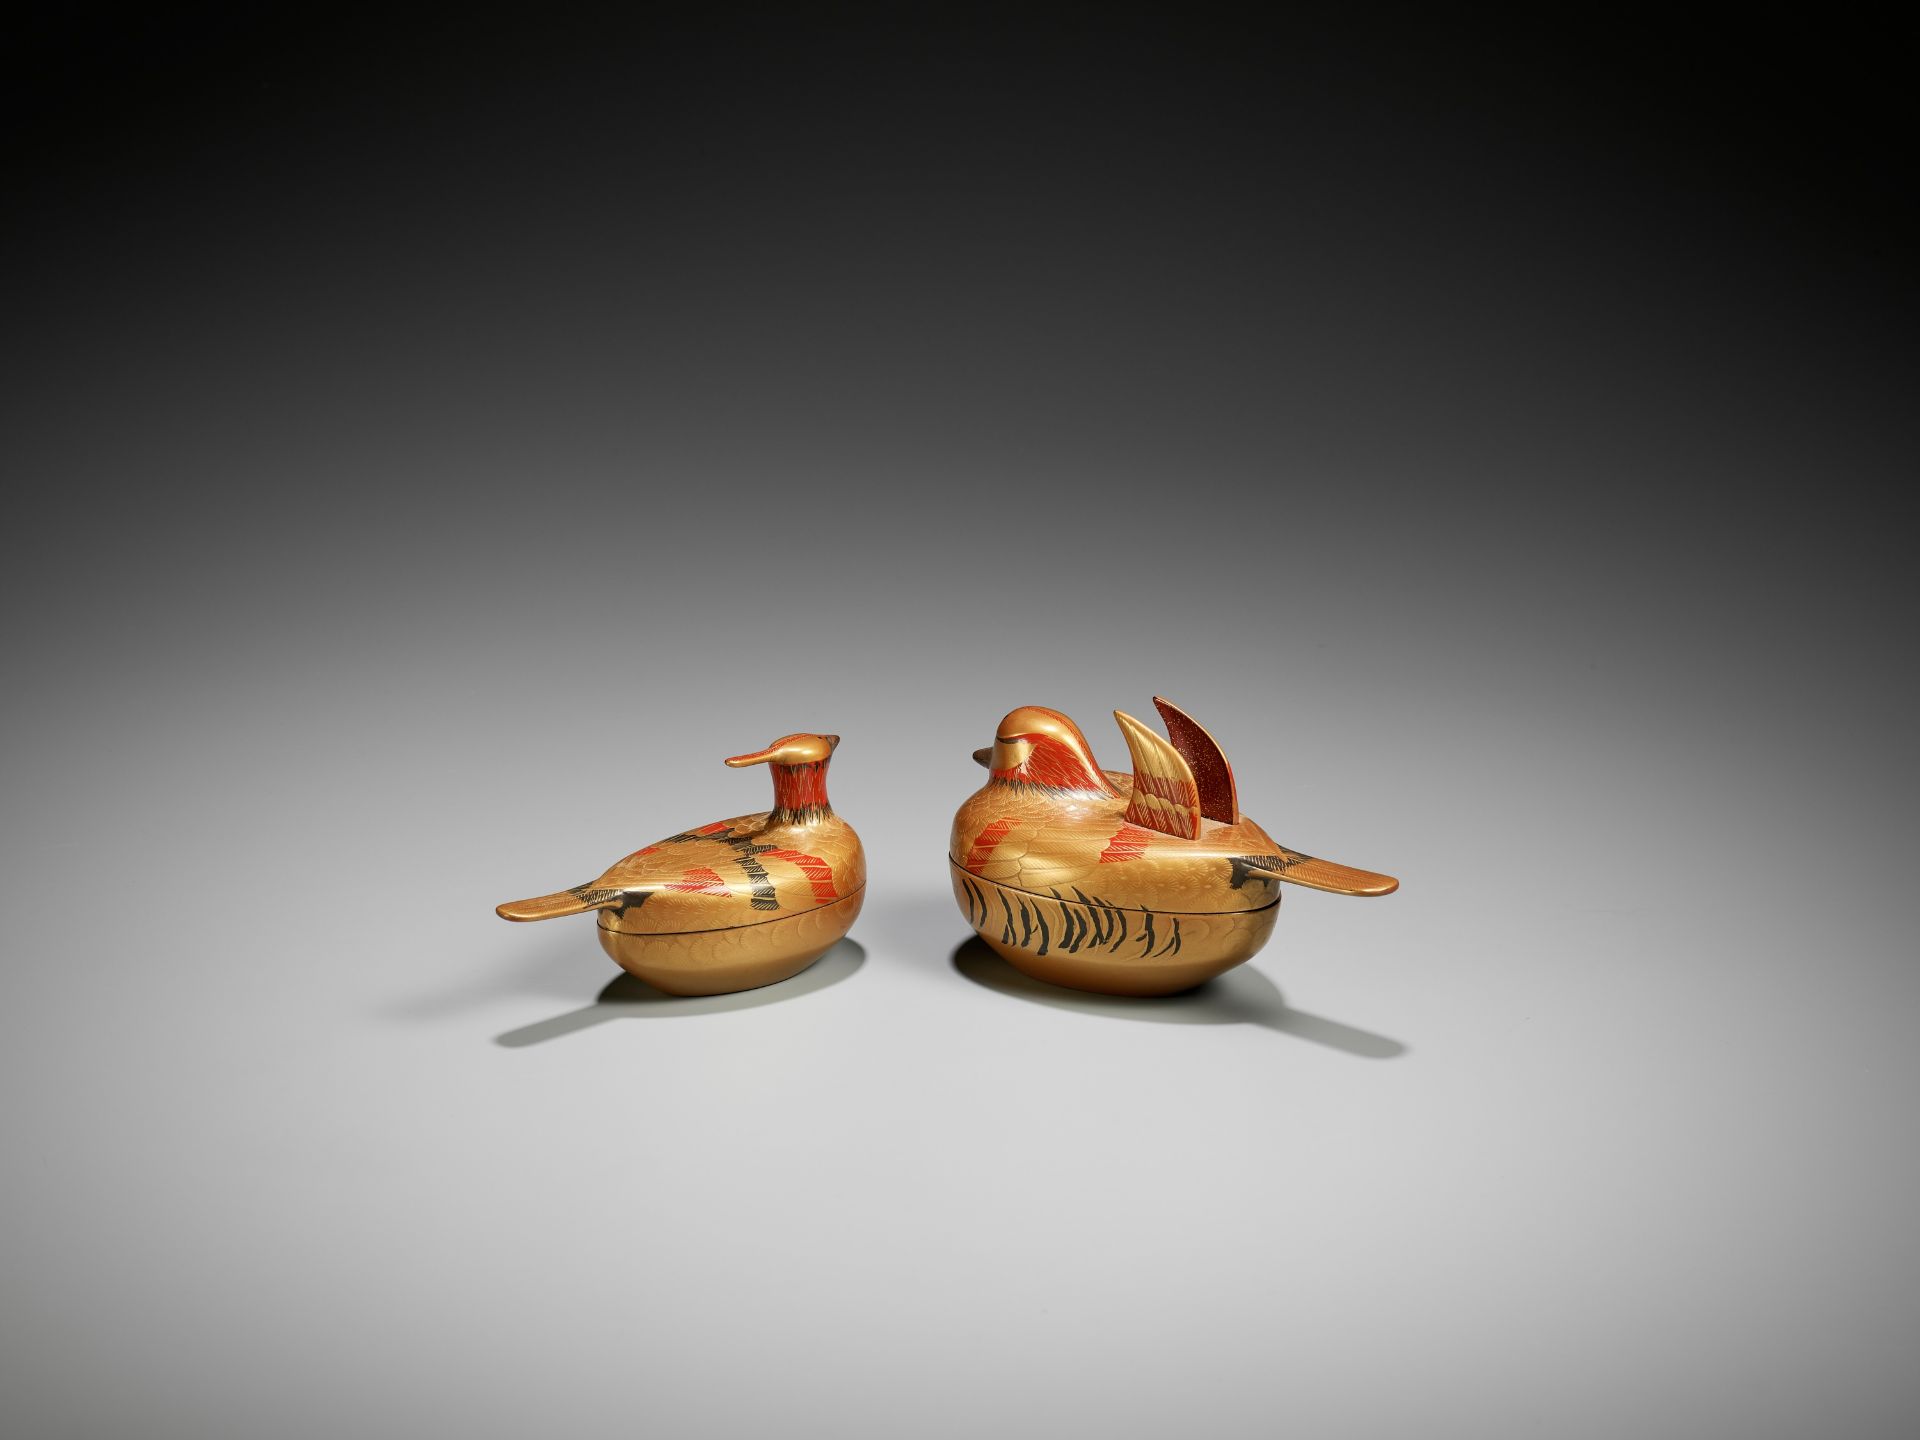 A PAIR OF GOLD LACQUER DUCK-FORM KOGO (INCENSE BOXES) AND COVERS - Image 5 of 9